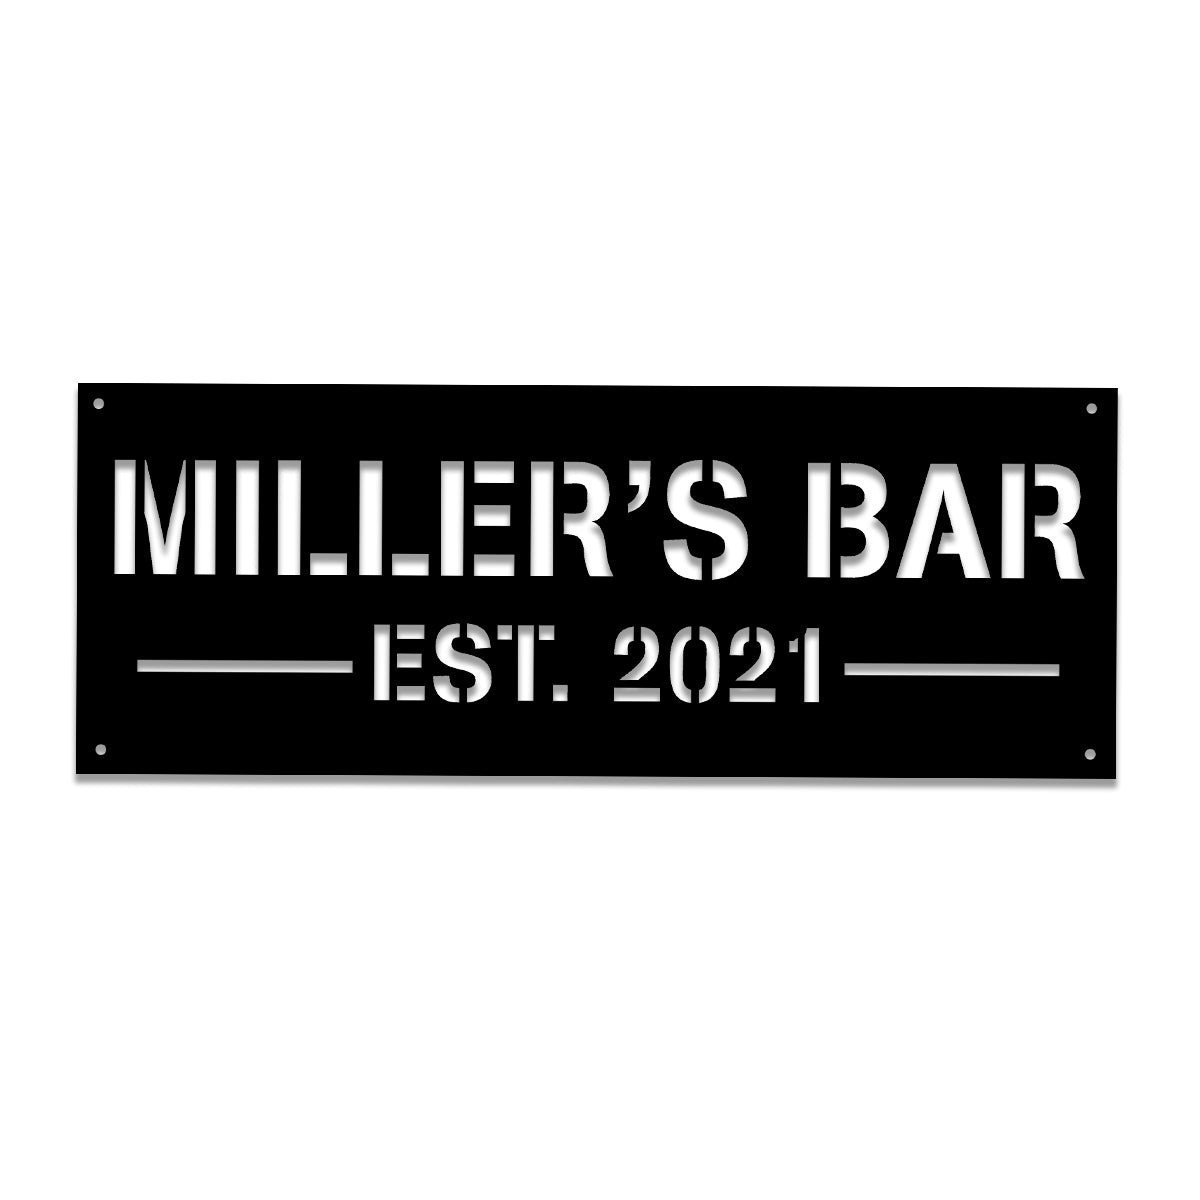 Personalized Metal Bar Sign, Pub, Tap, Lounge, Home Wall Decor, Wedding, Anniversary Art Gift For Him/her, Metal Laser Cut Metal Signs Custom Gift Ideas 12x12IN